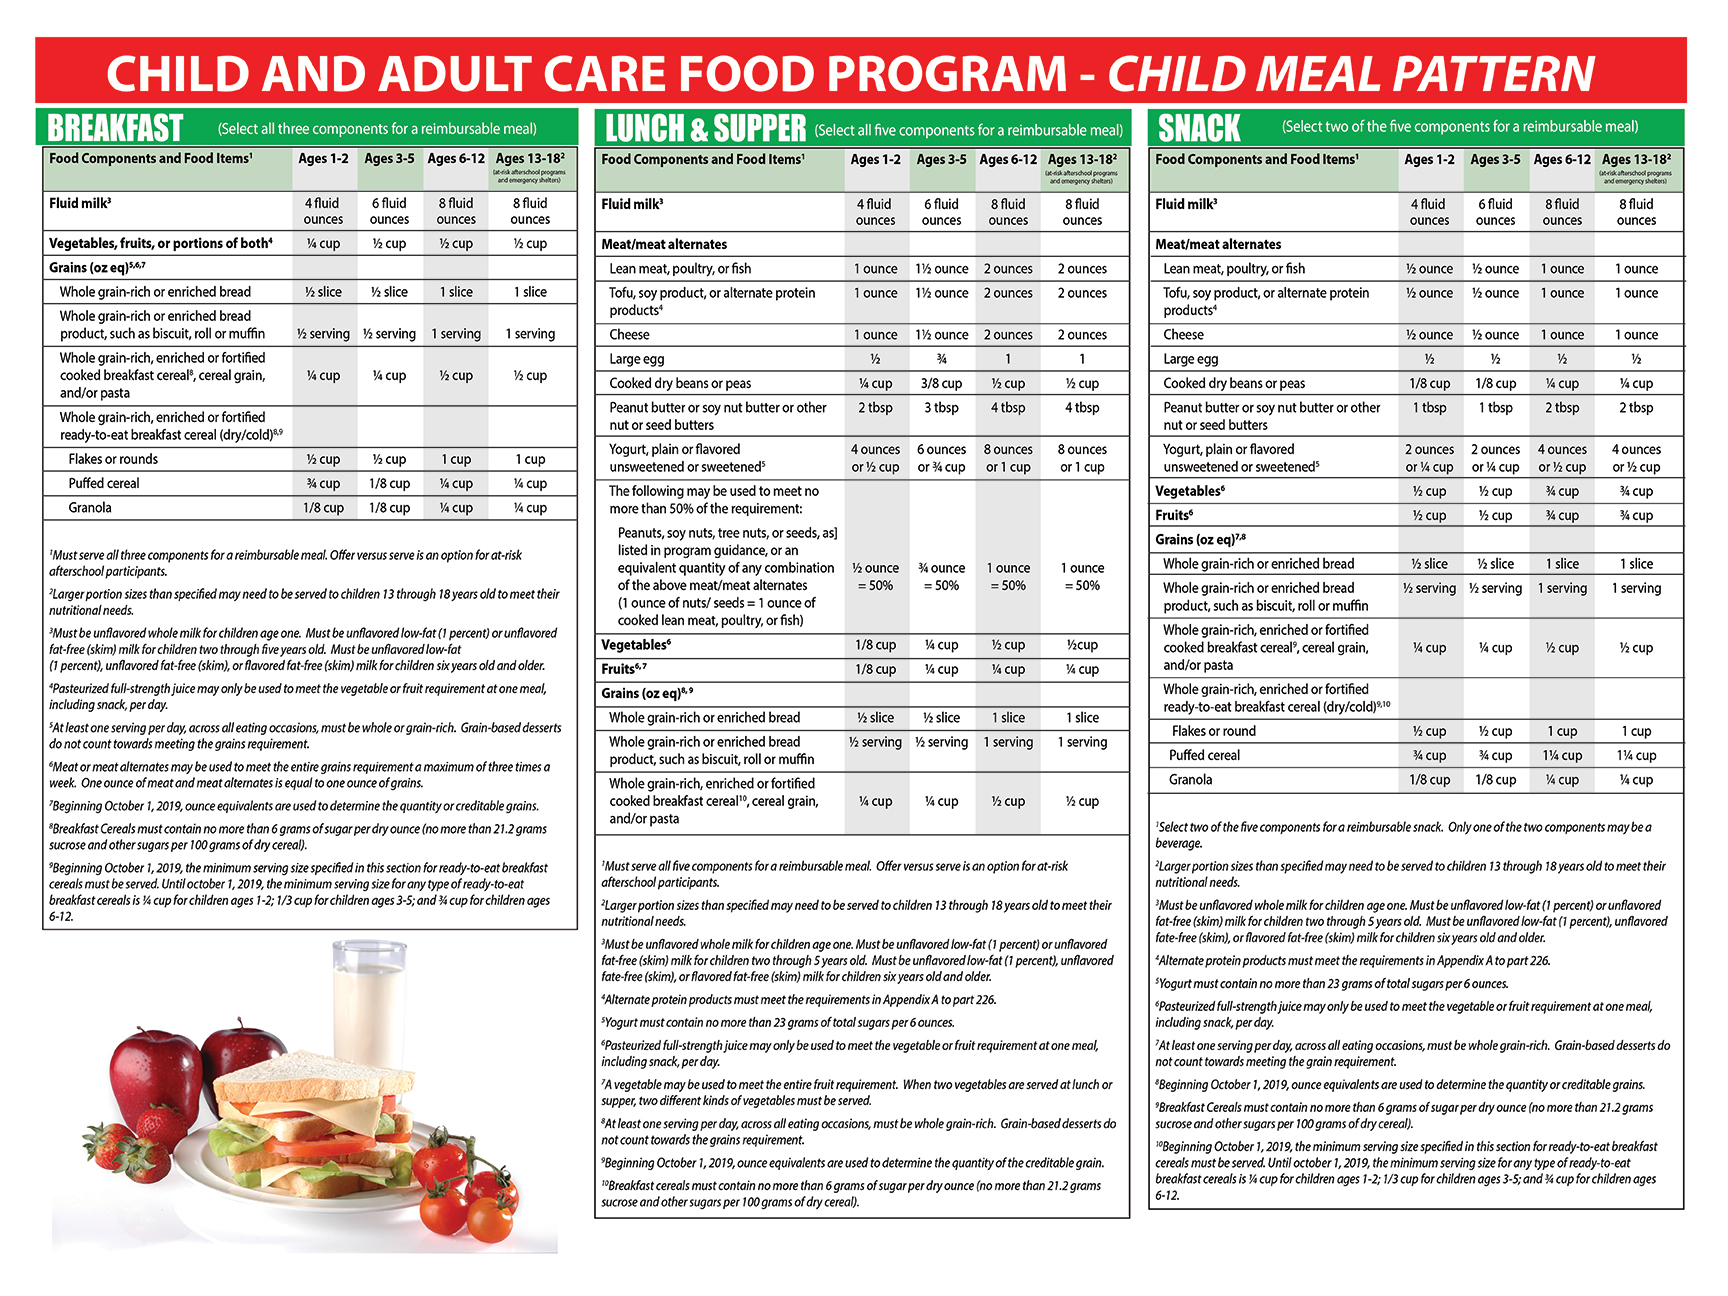 24x18-landscape-child-meal-pattern-chart-final-2-aug-2017-qty100-gloss-text-w-5-mil-gloss-lam-edge-seal-72-res.jpg